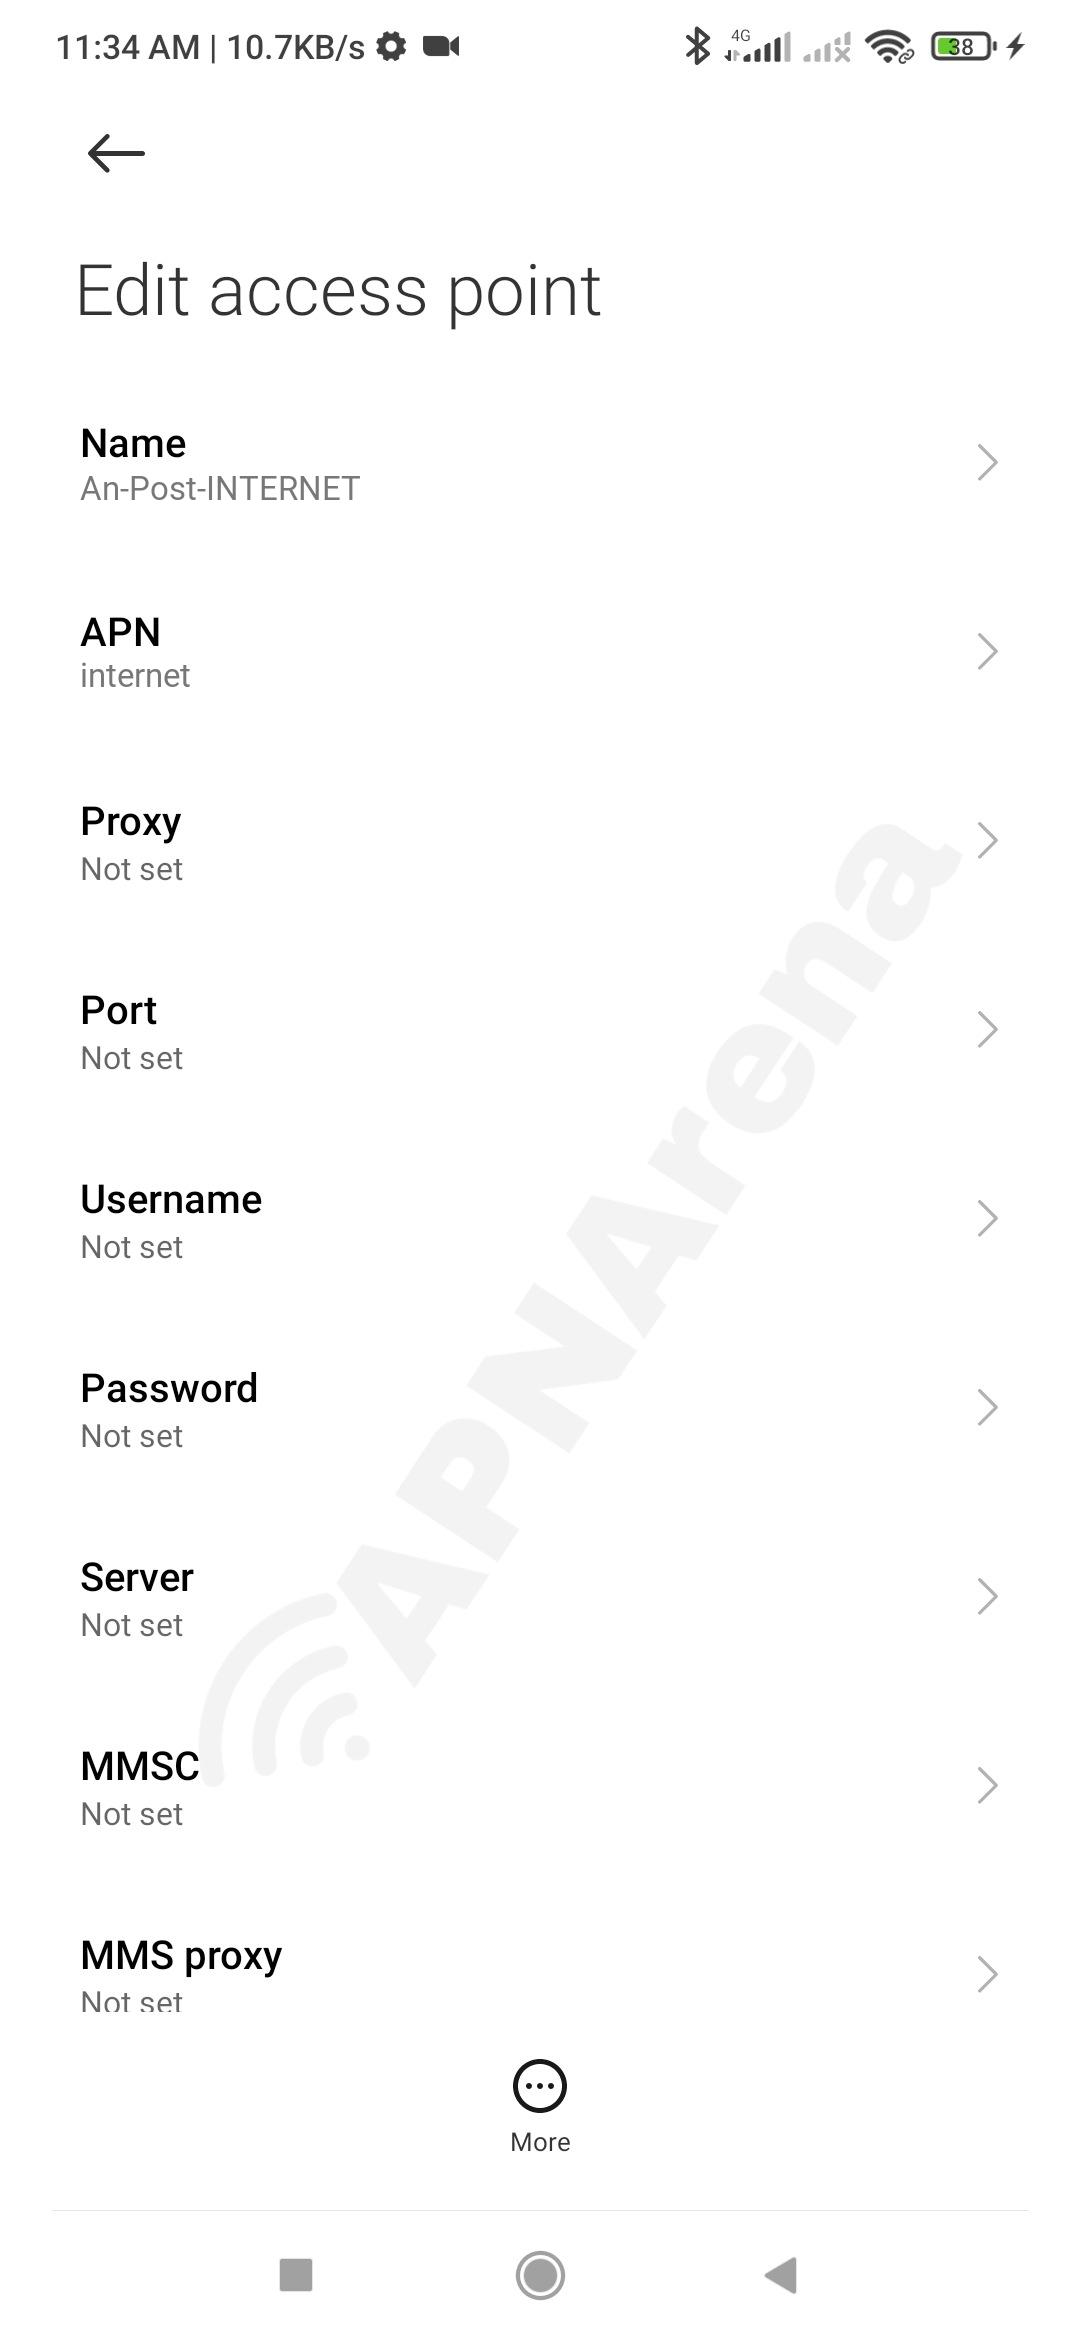 An Post (Postfone) APN Settings for Android